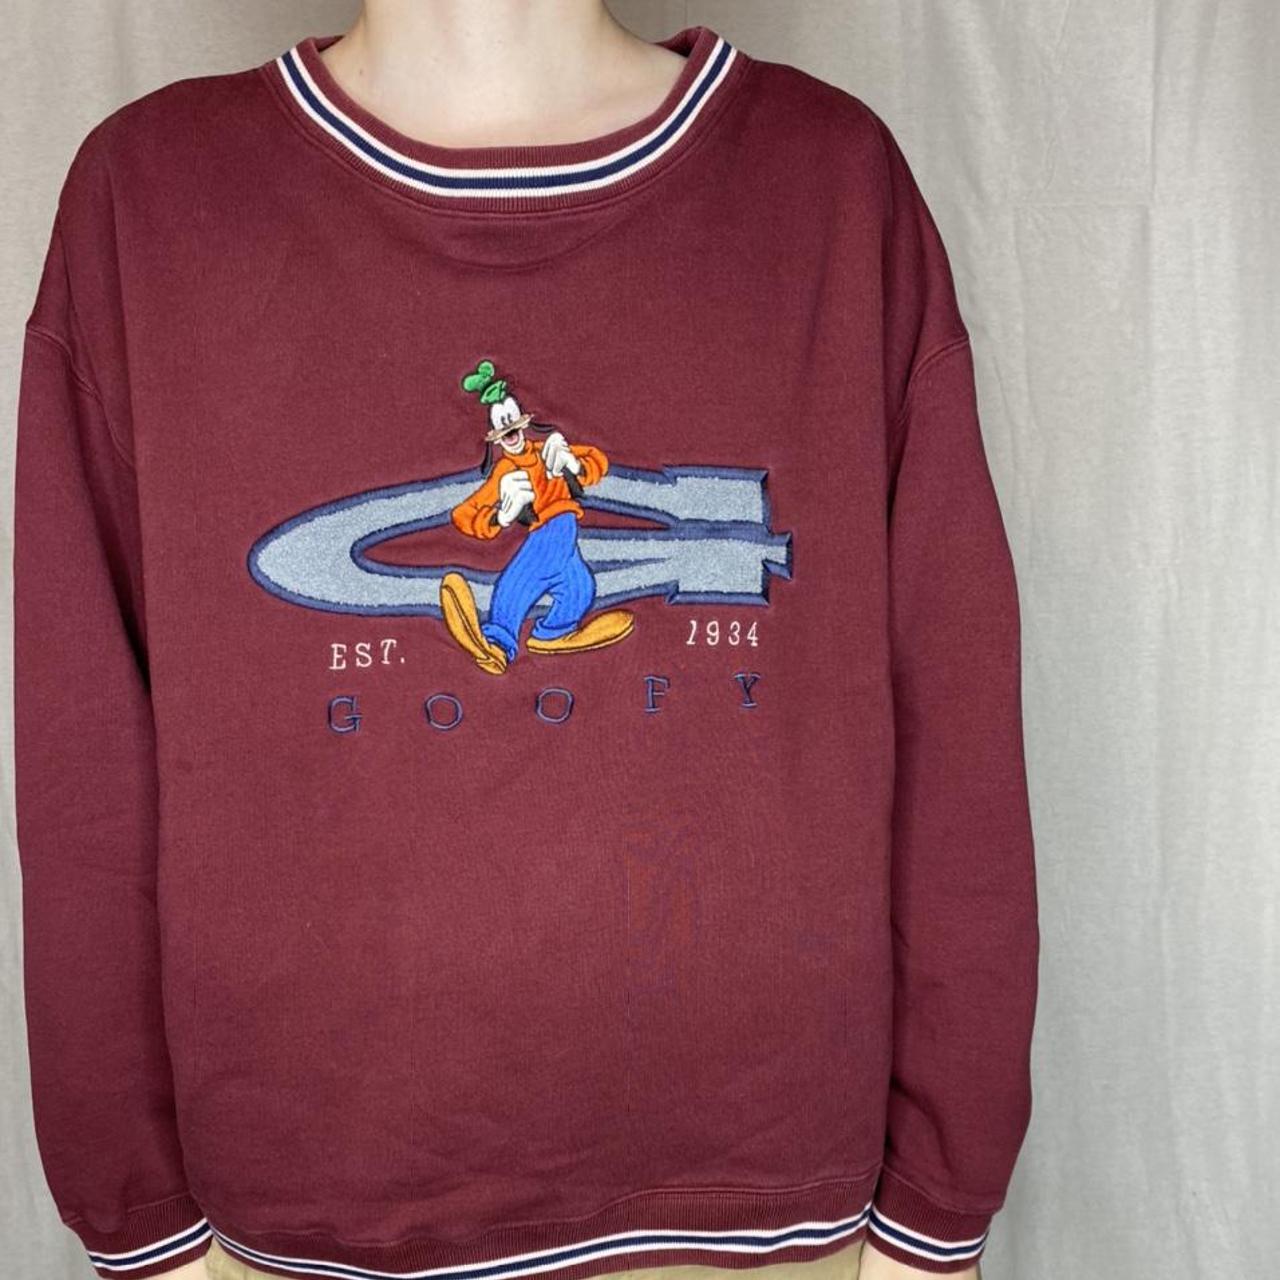 Product Image 1 - Cartoon Goofy Sweater 

🪐Condition is